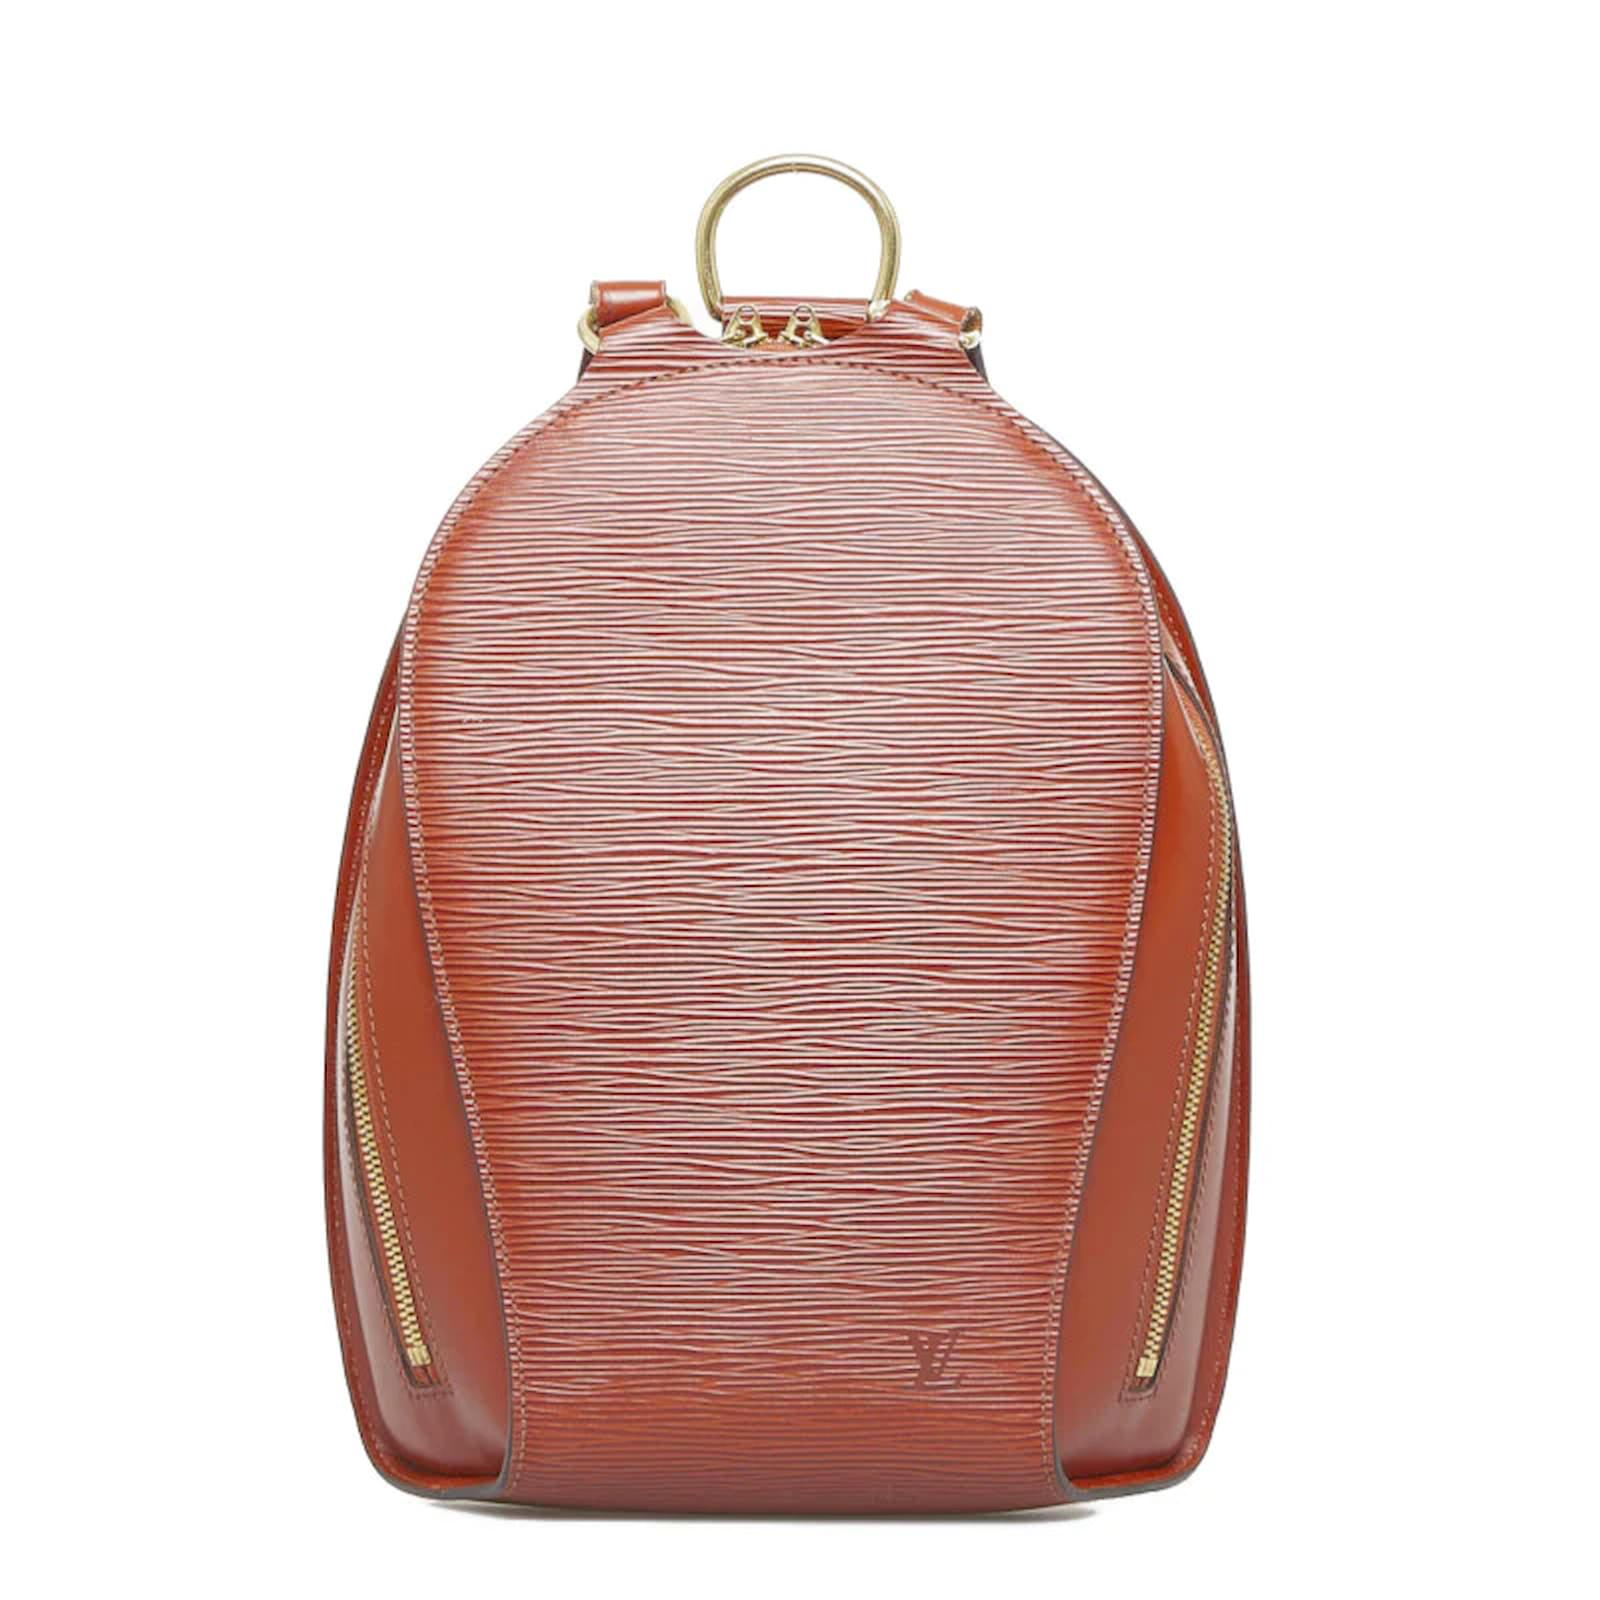 LOUIS VUITTON Vernis Hot Springs Backpack Pink M53545 LV Auth